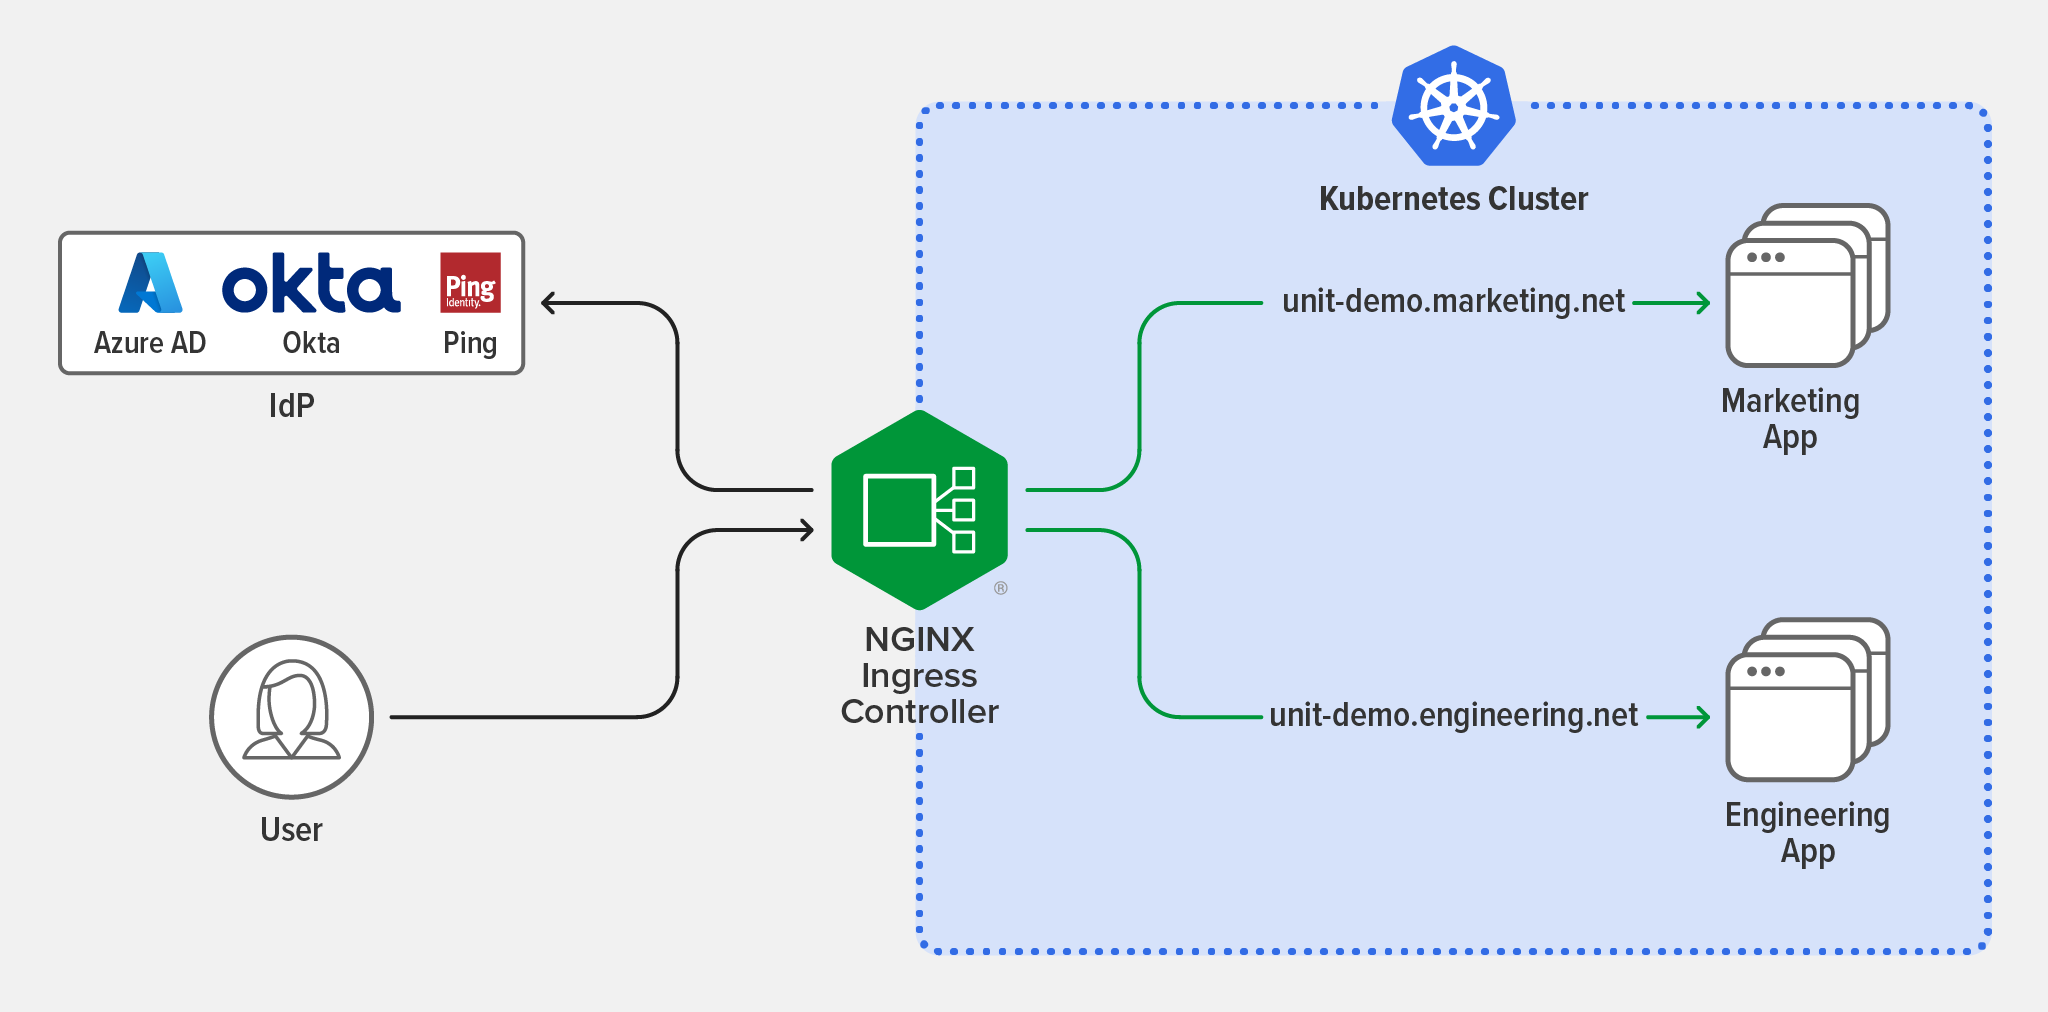 Diagram showing offload of Kubernetes authentication and authorization to the Ingress controller